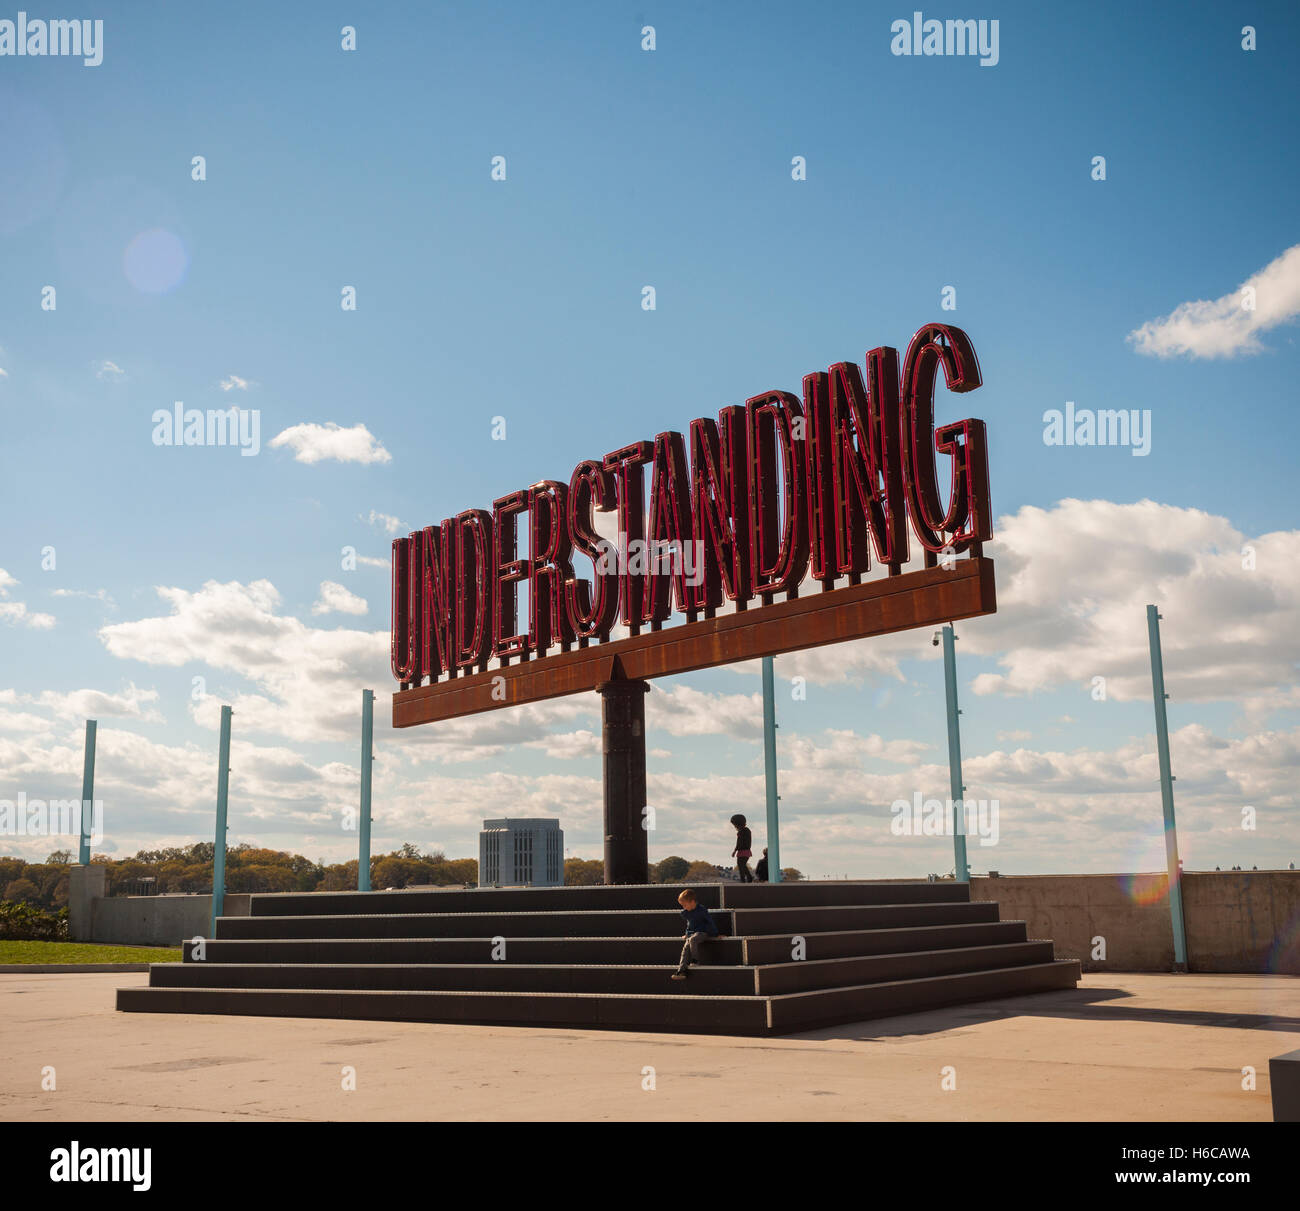 The rotating 'Understanding' public art sculpture in Brooklyn Bridge Park in New York on Sunday, October 23, 2016. 'Understanding' by the artist Martin Creed features a 25 foot tall rotating red sculpture spelling out the word understanding reminiscent of a billboard on the side of a highway.  (© Richard B. Levine) Stock Photo